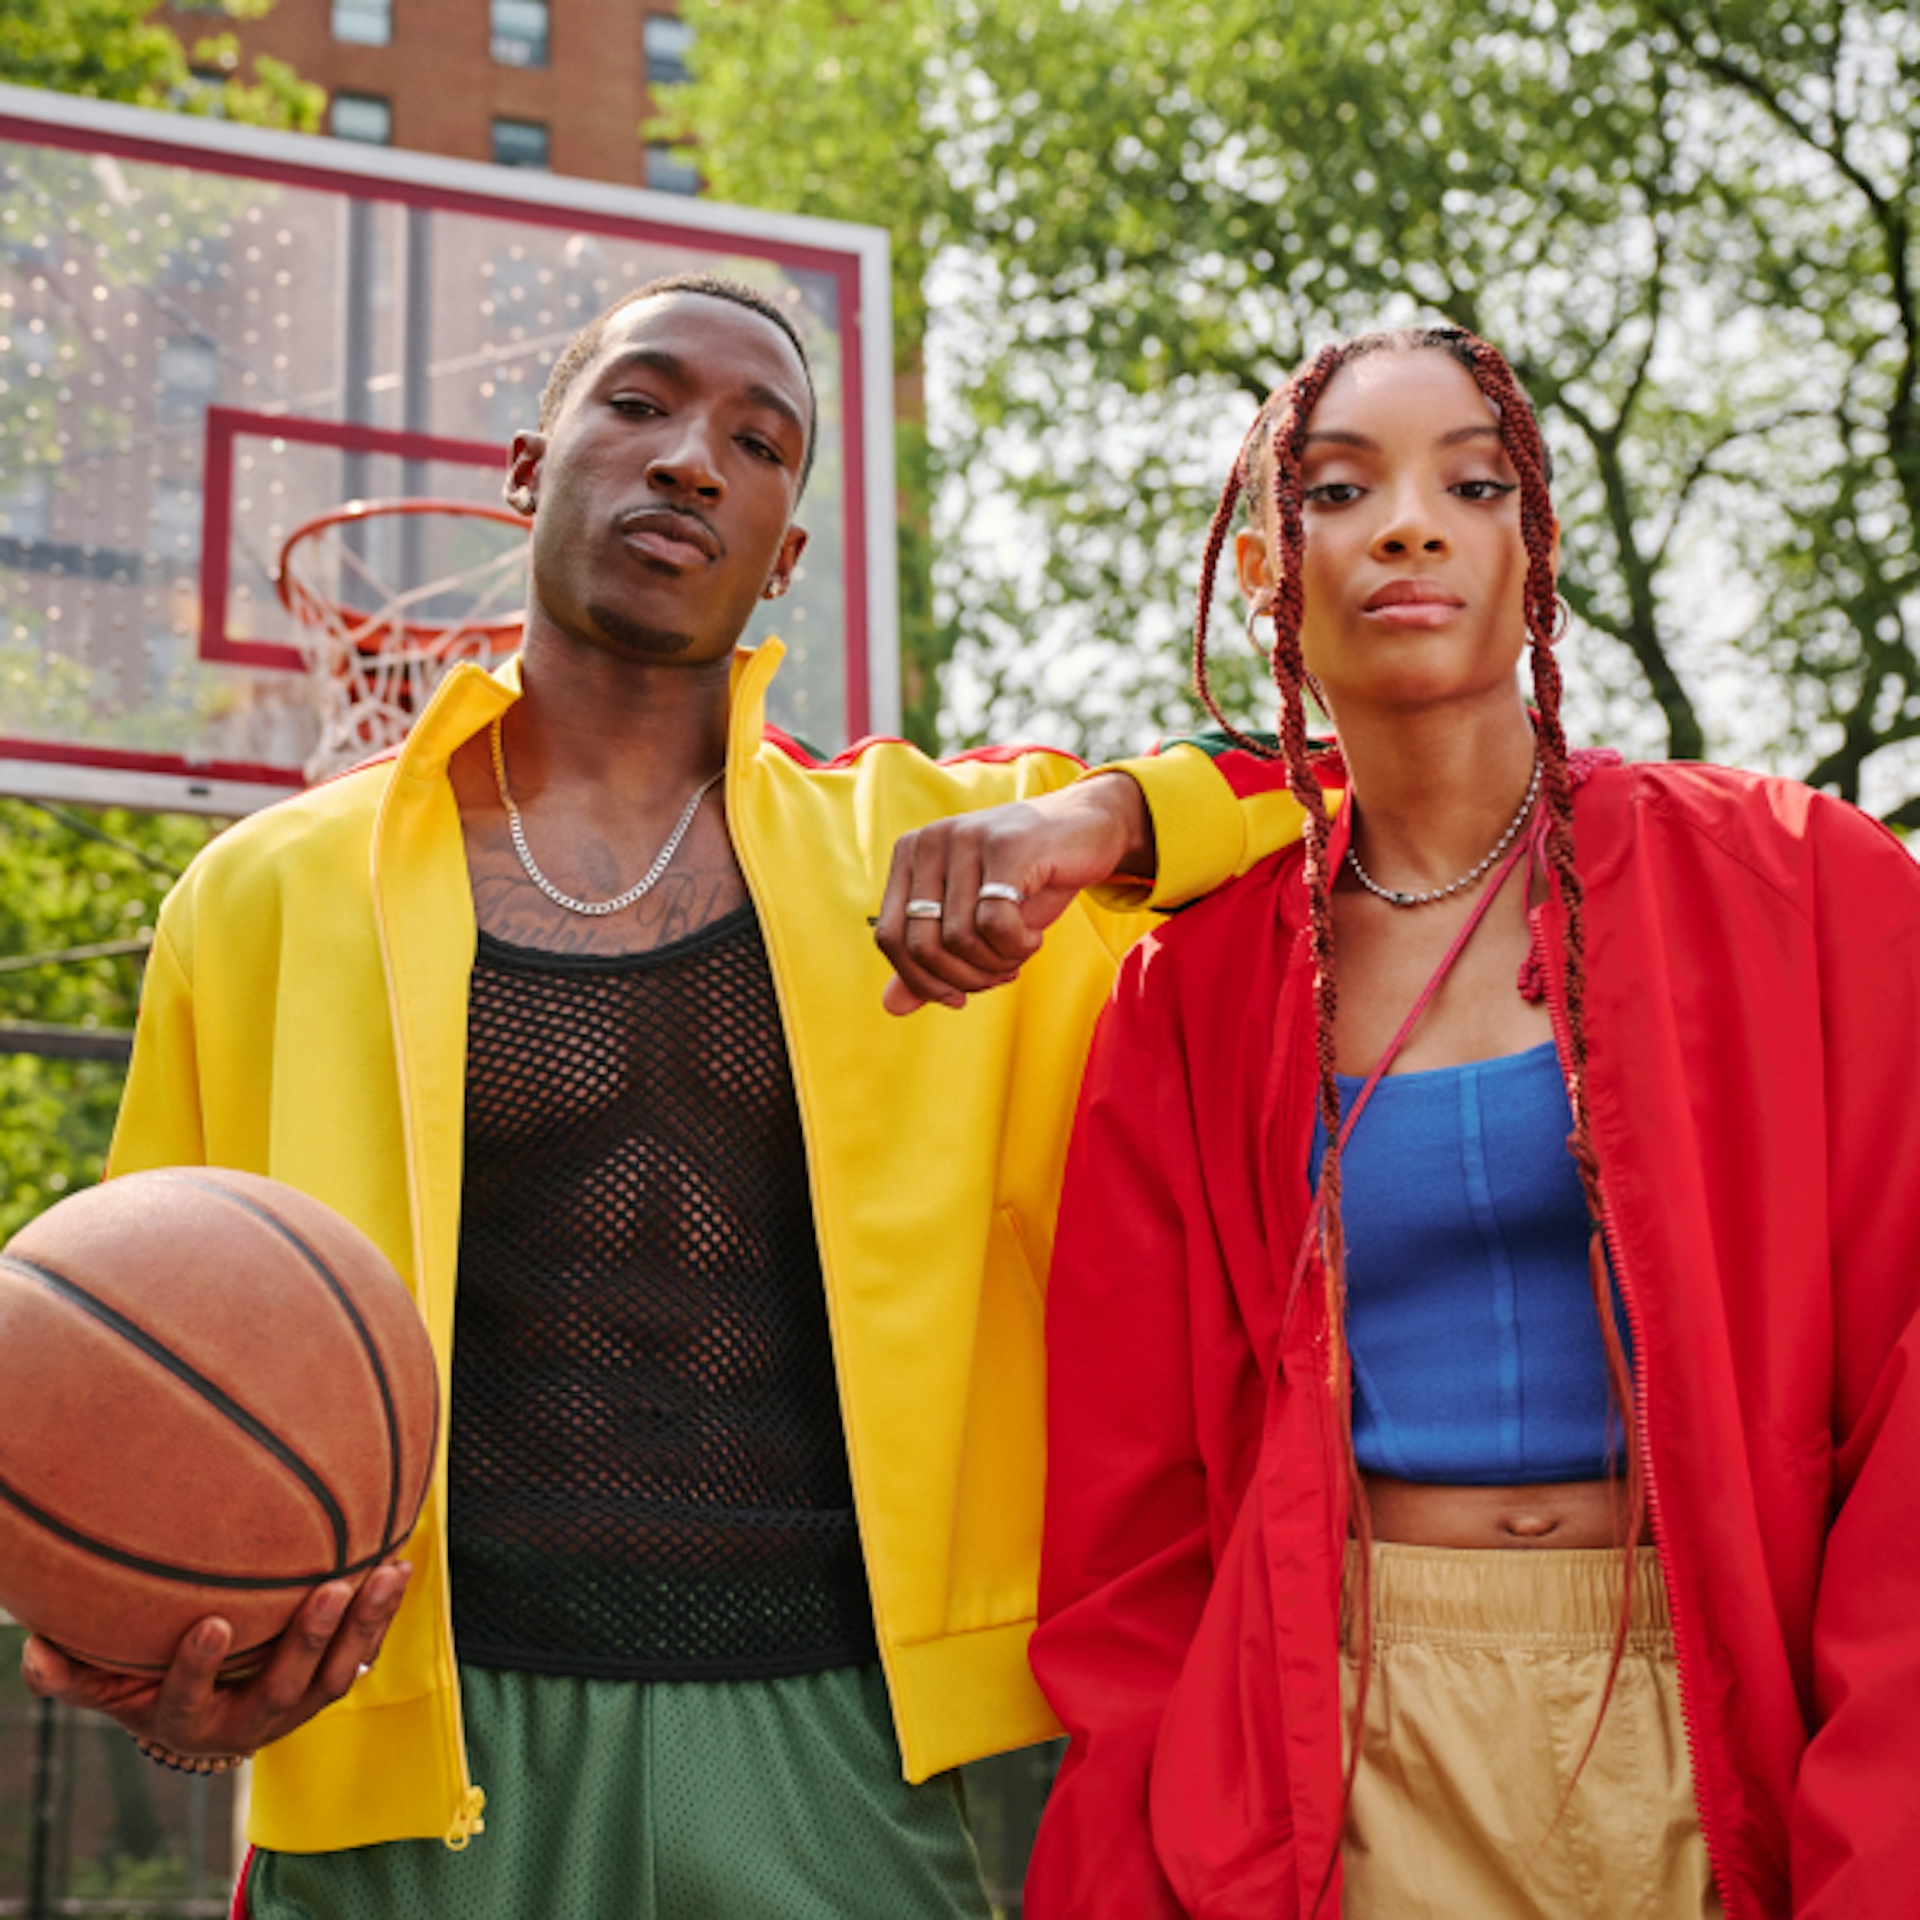 The image shows two individuals standing confidently on a basketball court outdoors. The person on the left is holding a basketball and wearing a yellow jacket over a black mesh shirt and green shorts. The person on the right is wearing a red jacket over a blue top and beige pants. Both have a stylish and casual appearance, with a backdrop of trees and a basketball hoop visible behind them. They exude a cool, urban vibe with their relaxed yet assertive postures.